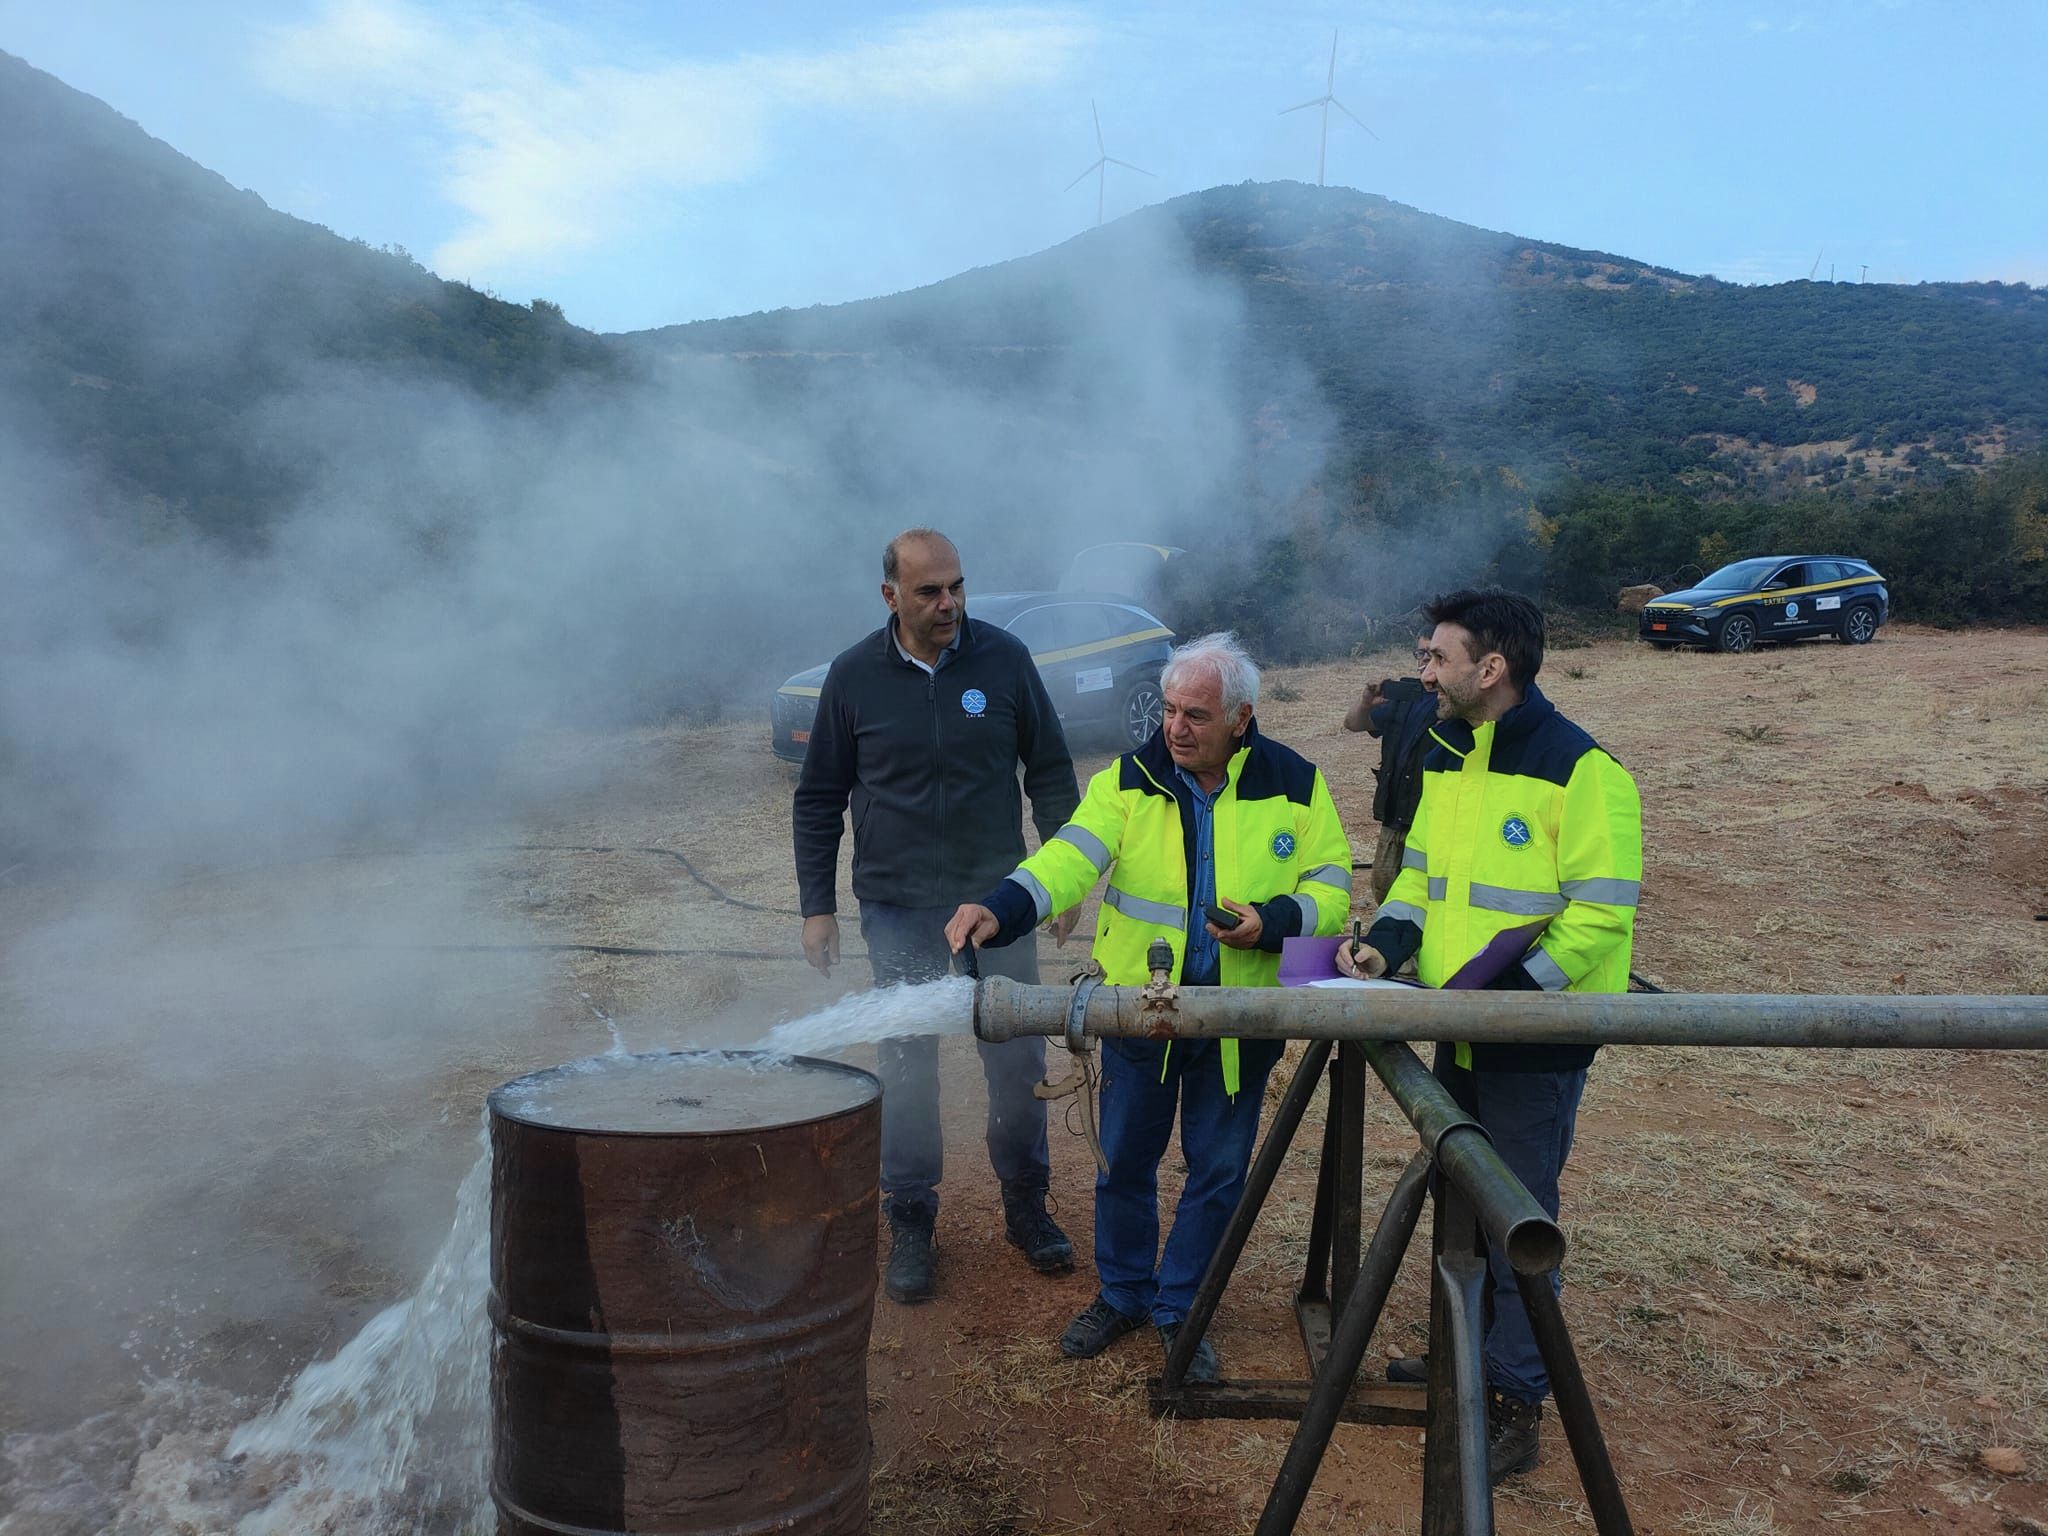 Hellenic Geological and Mining Research Authority: Geothermal Drilling “showed” almost 80oC in Sidirokastro, Serres